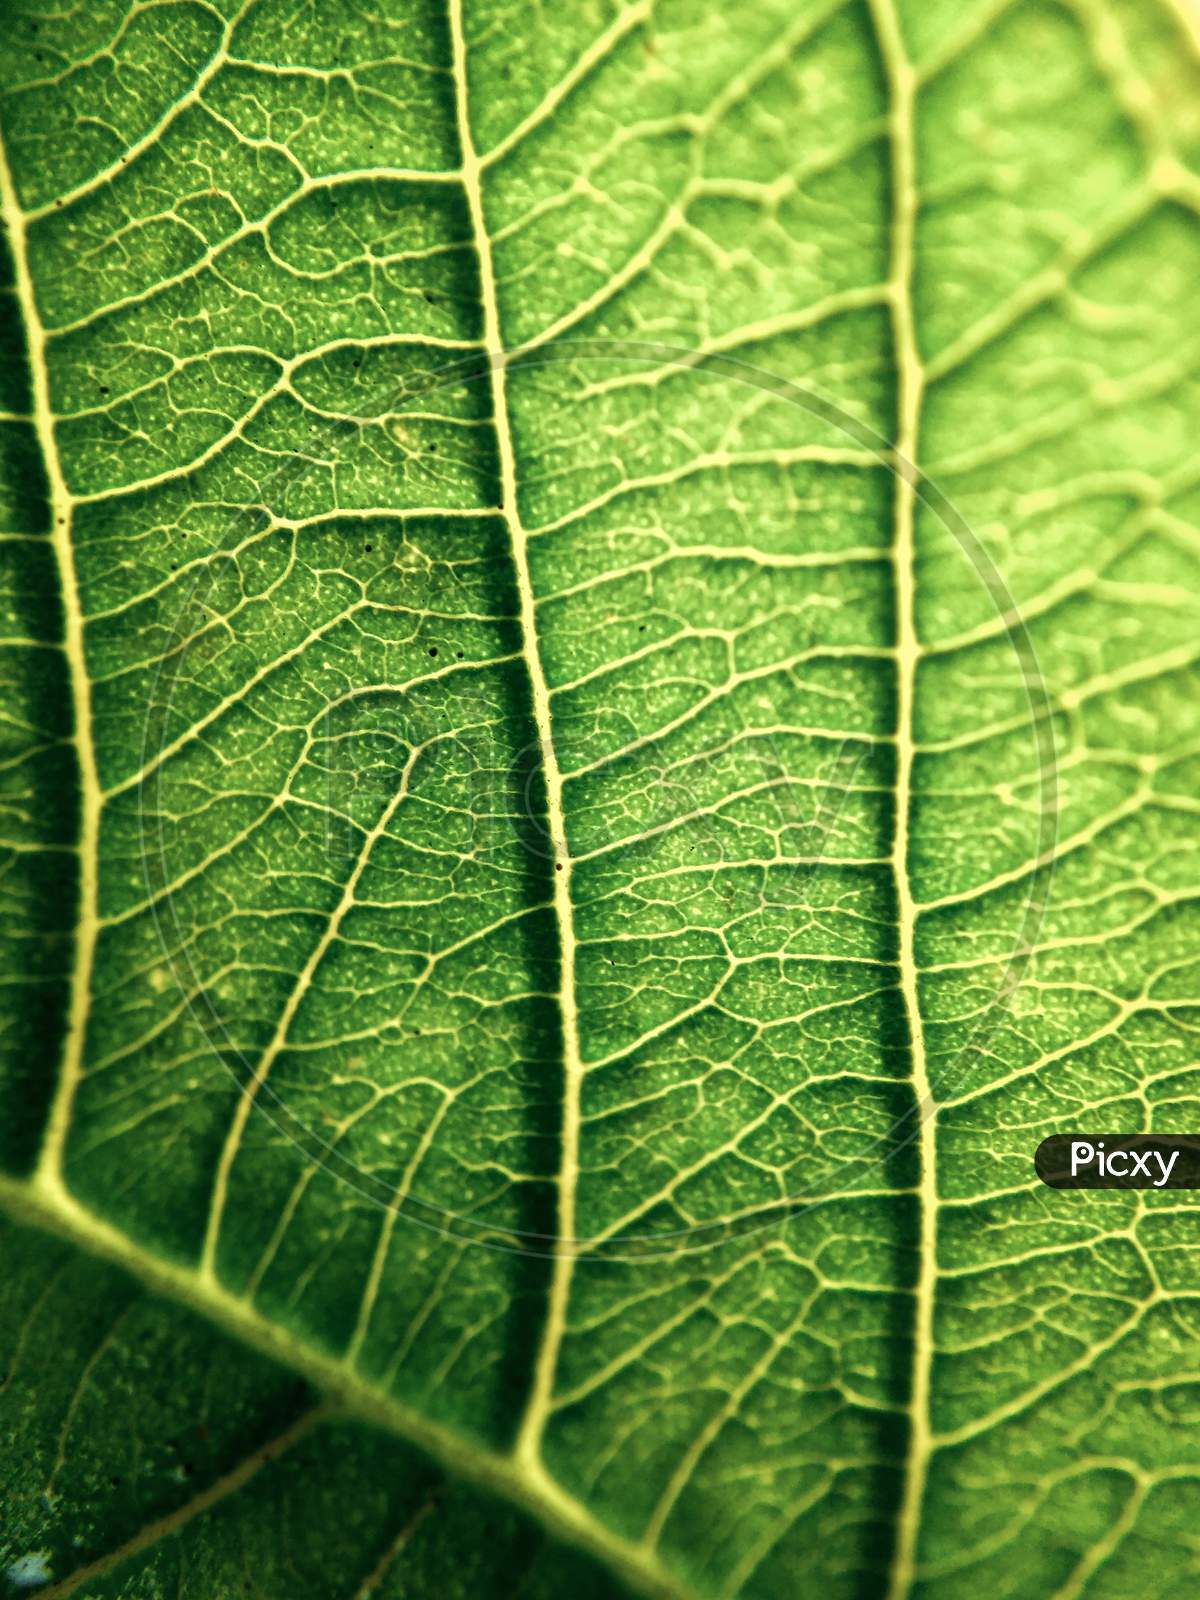 Amazing details of leaves with great texture